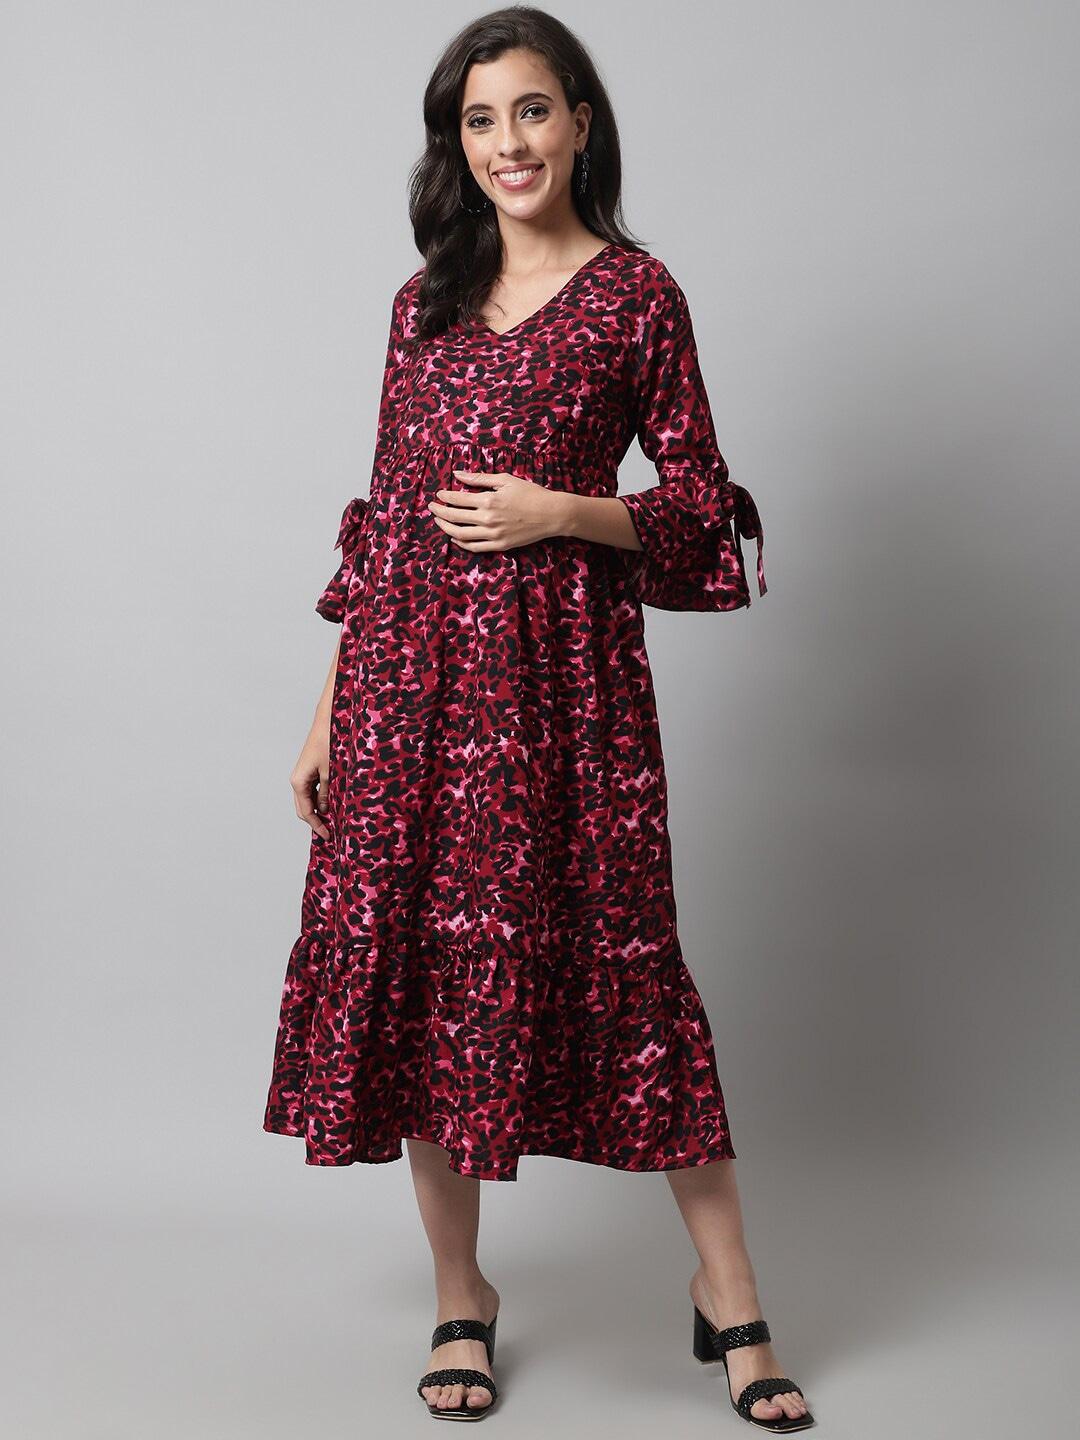 frempy floral print bell sleeve ruffled crepe maternity fit & flare midi dress